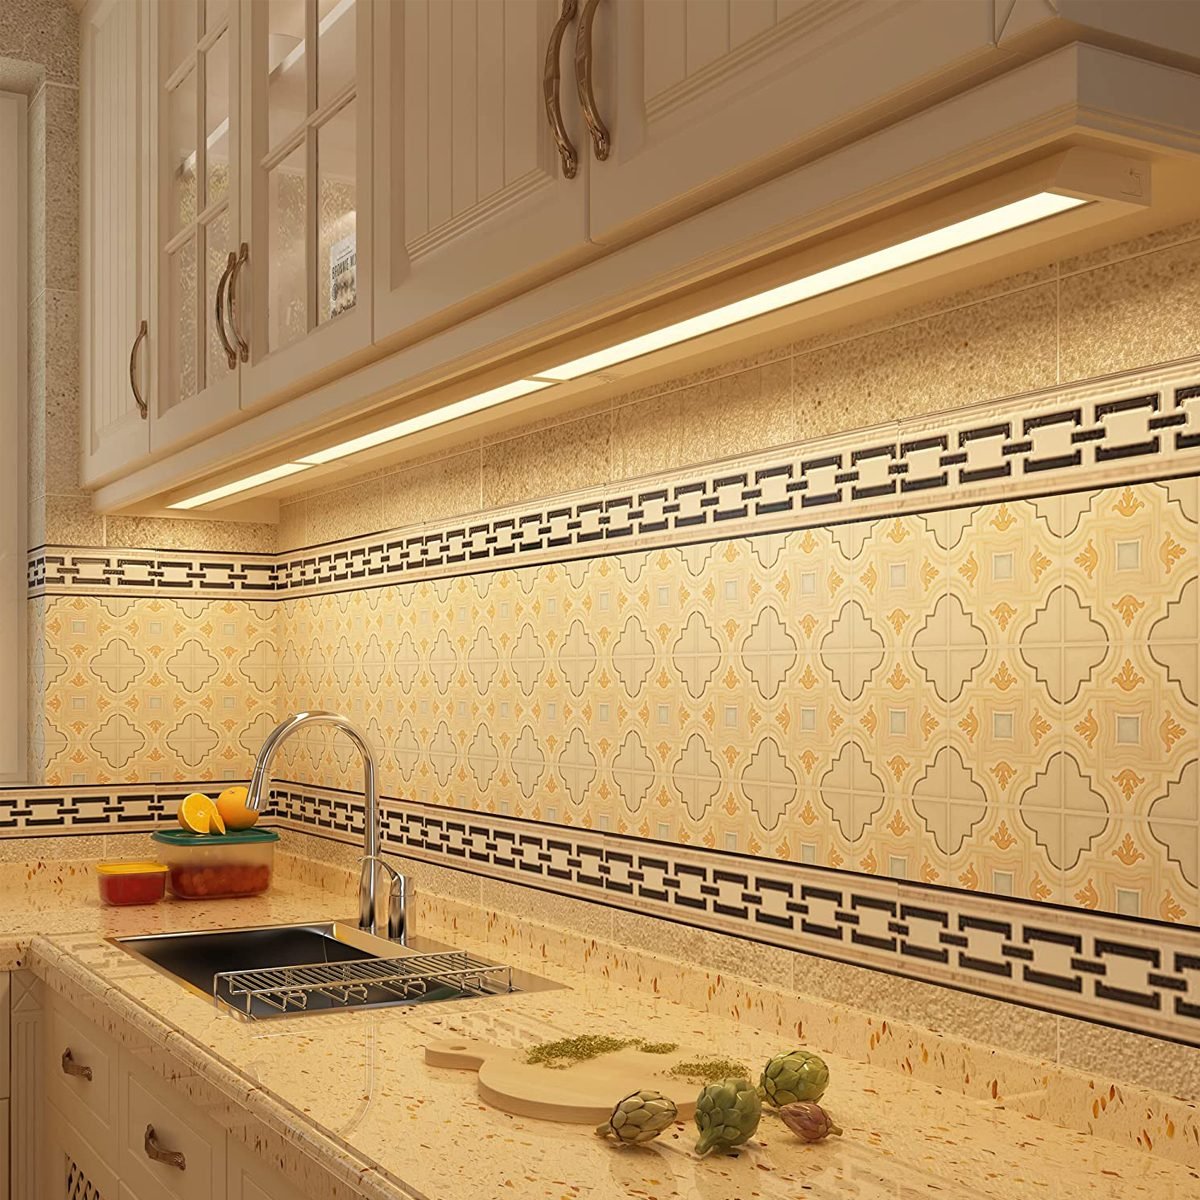 OLED Light Panels Transform Kitchen Space with Under Cabinet Light